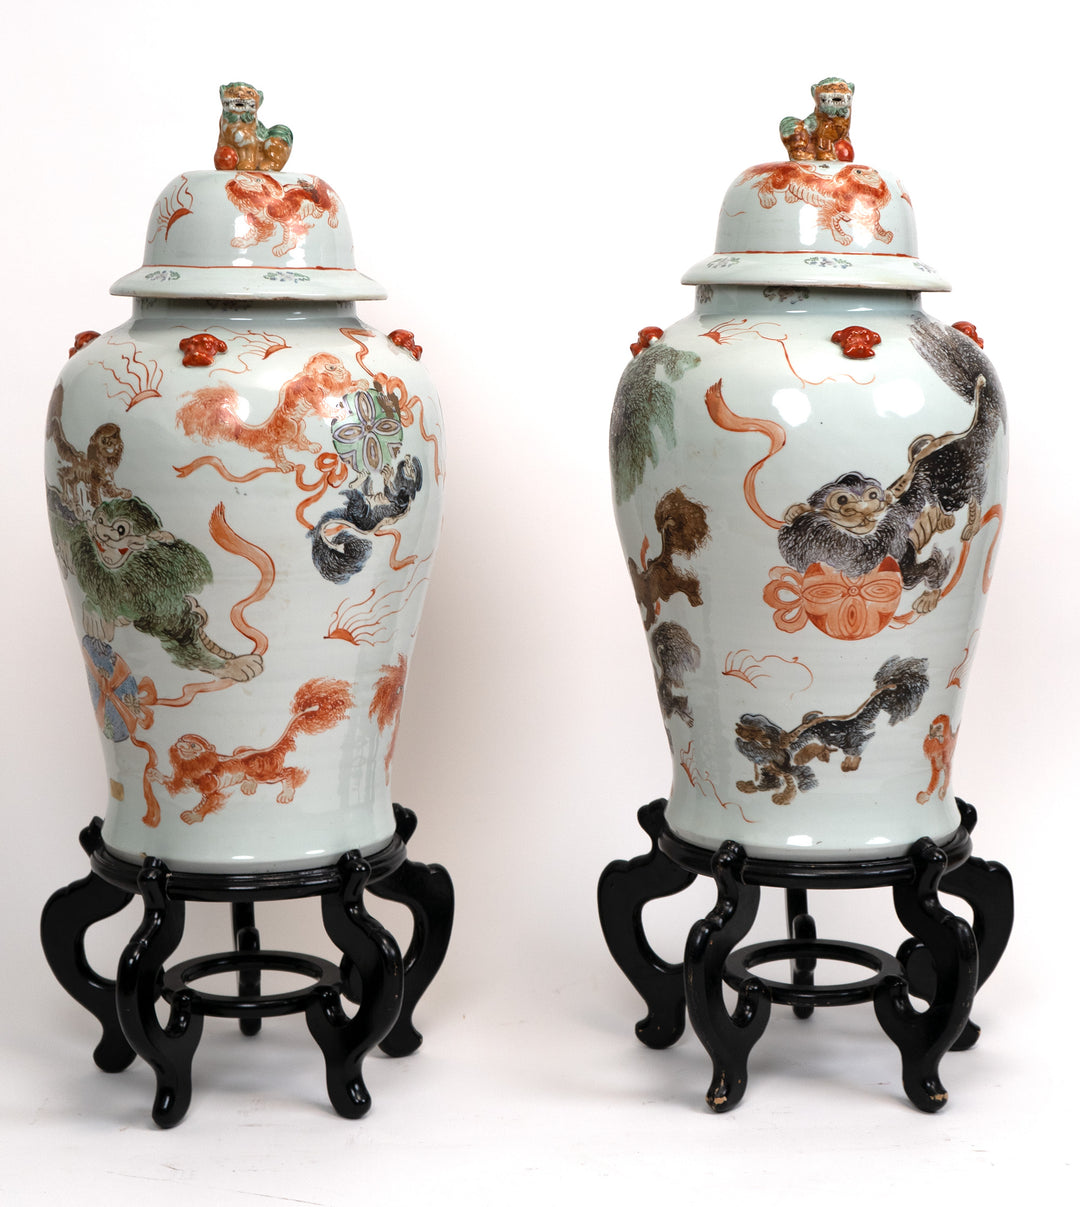 Pair of Large Chinese Vases